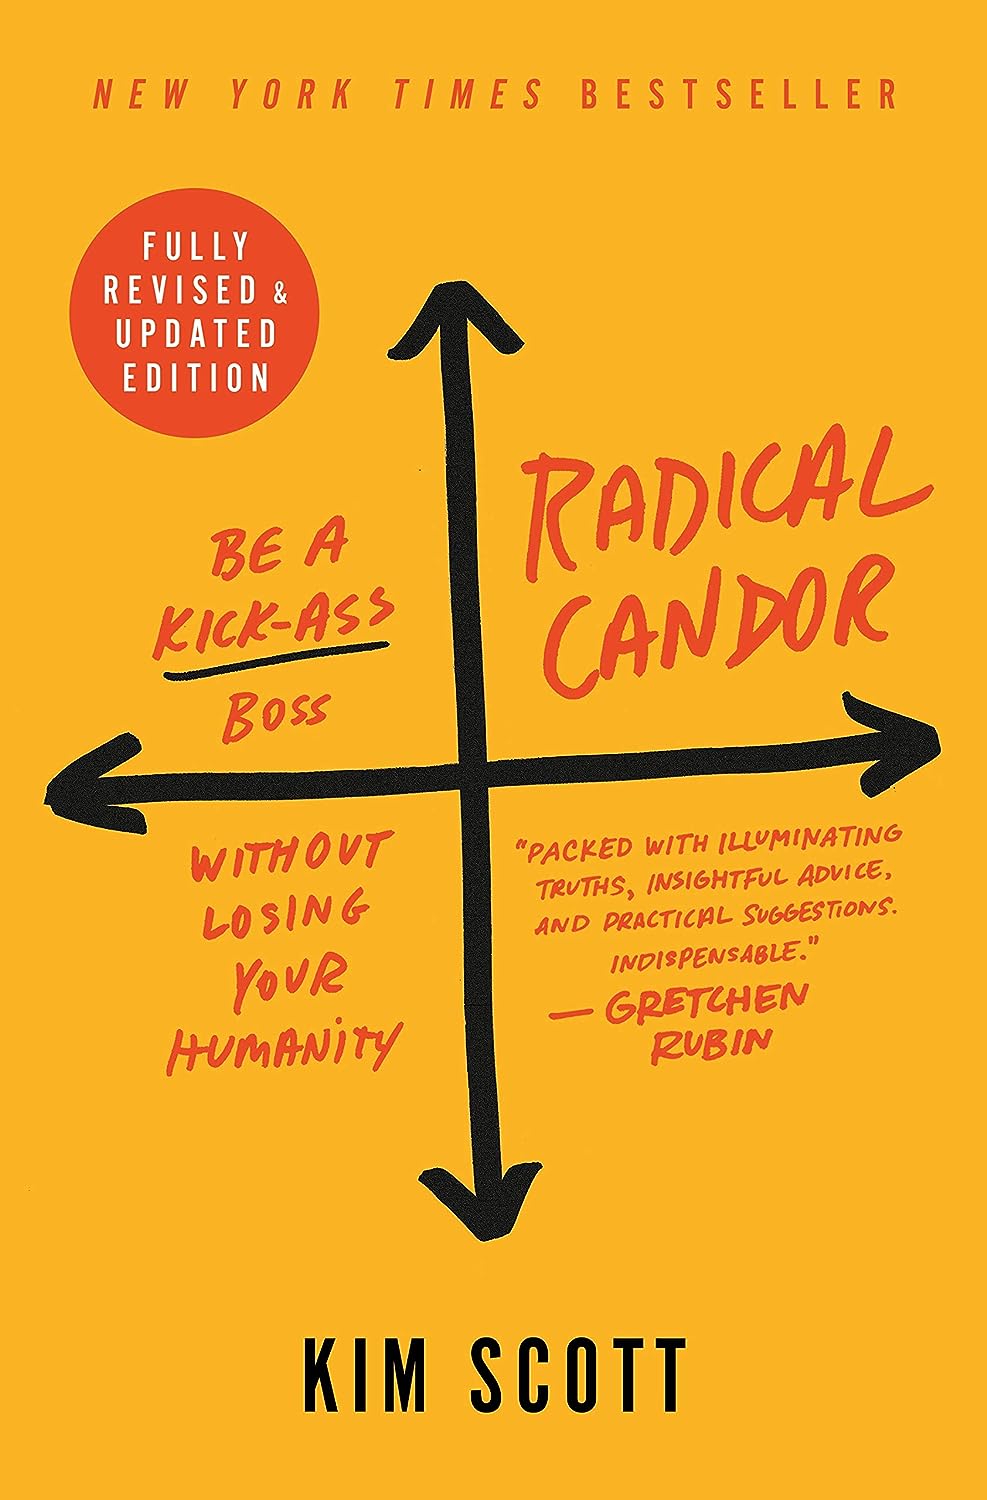 Kim Scott - Radical Candor. Fully Revised _ Updated Edition. Be a Kick-Ass Boss Without Losing Your Humanity